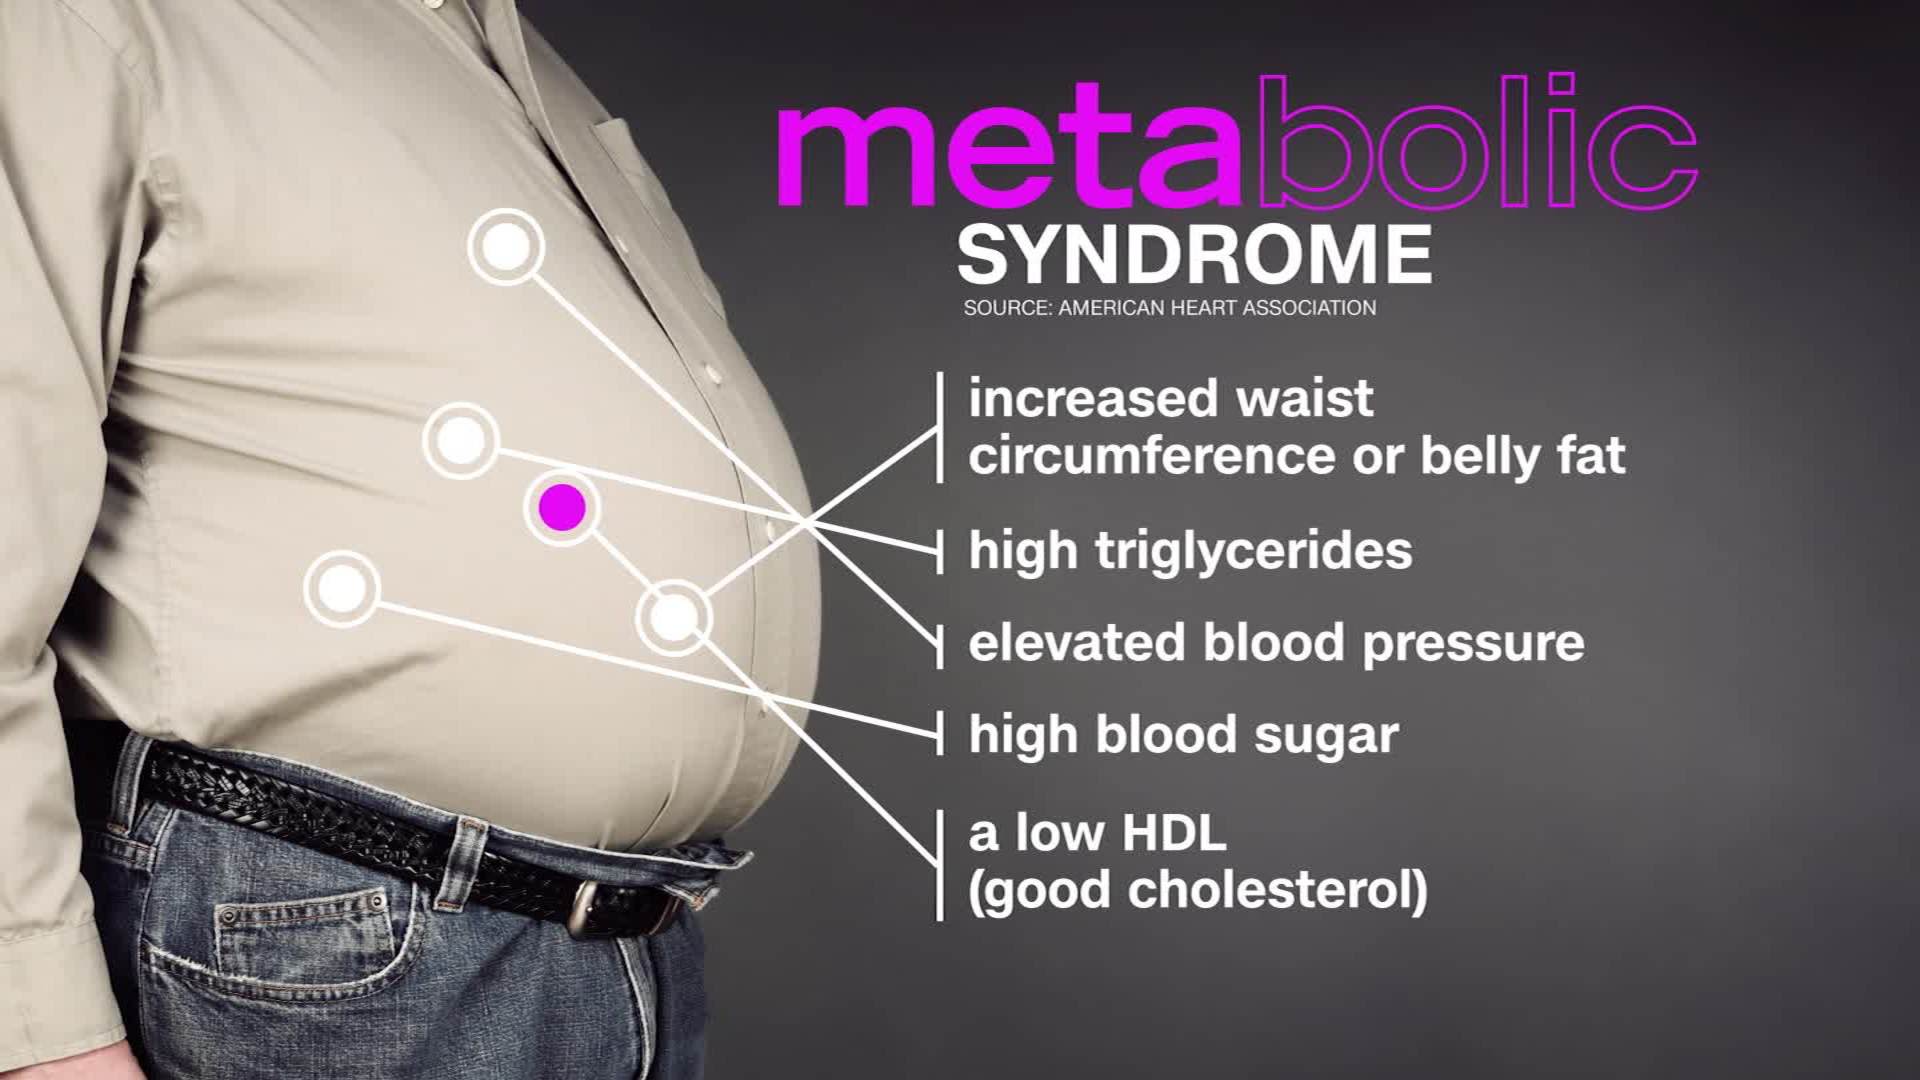 Waist circumference and metabolic syndrome